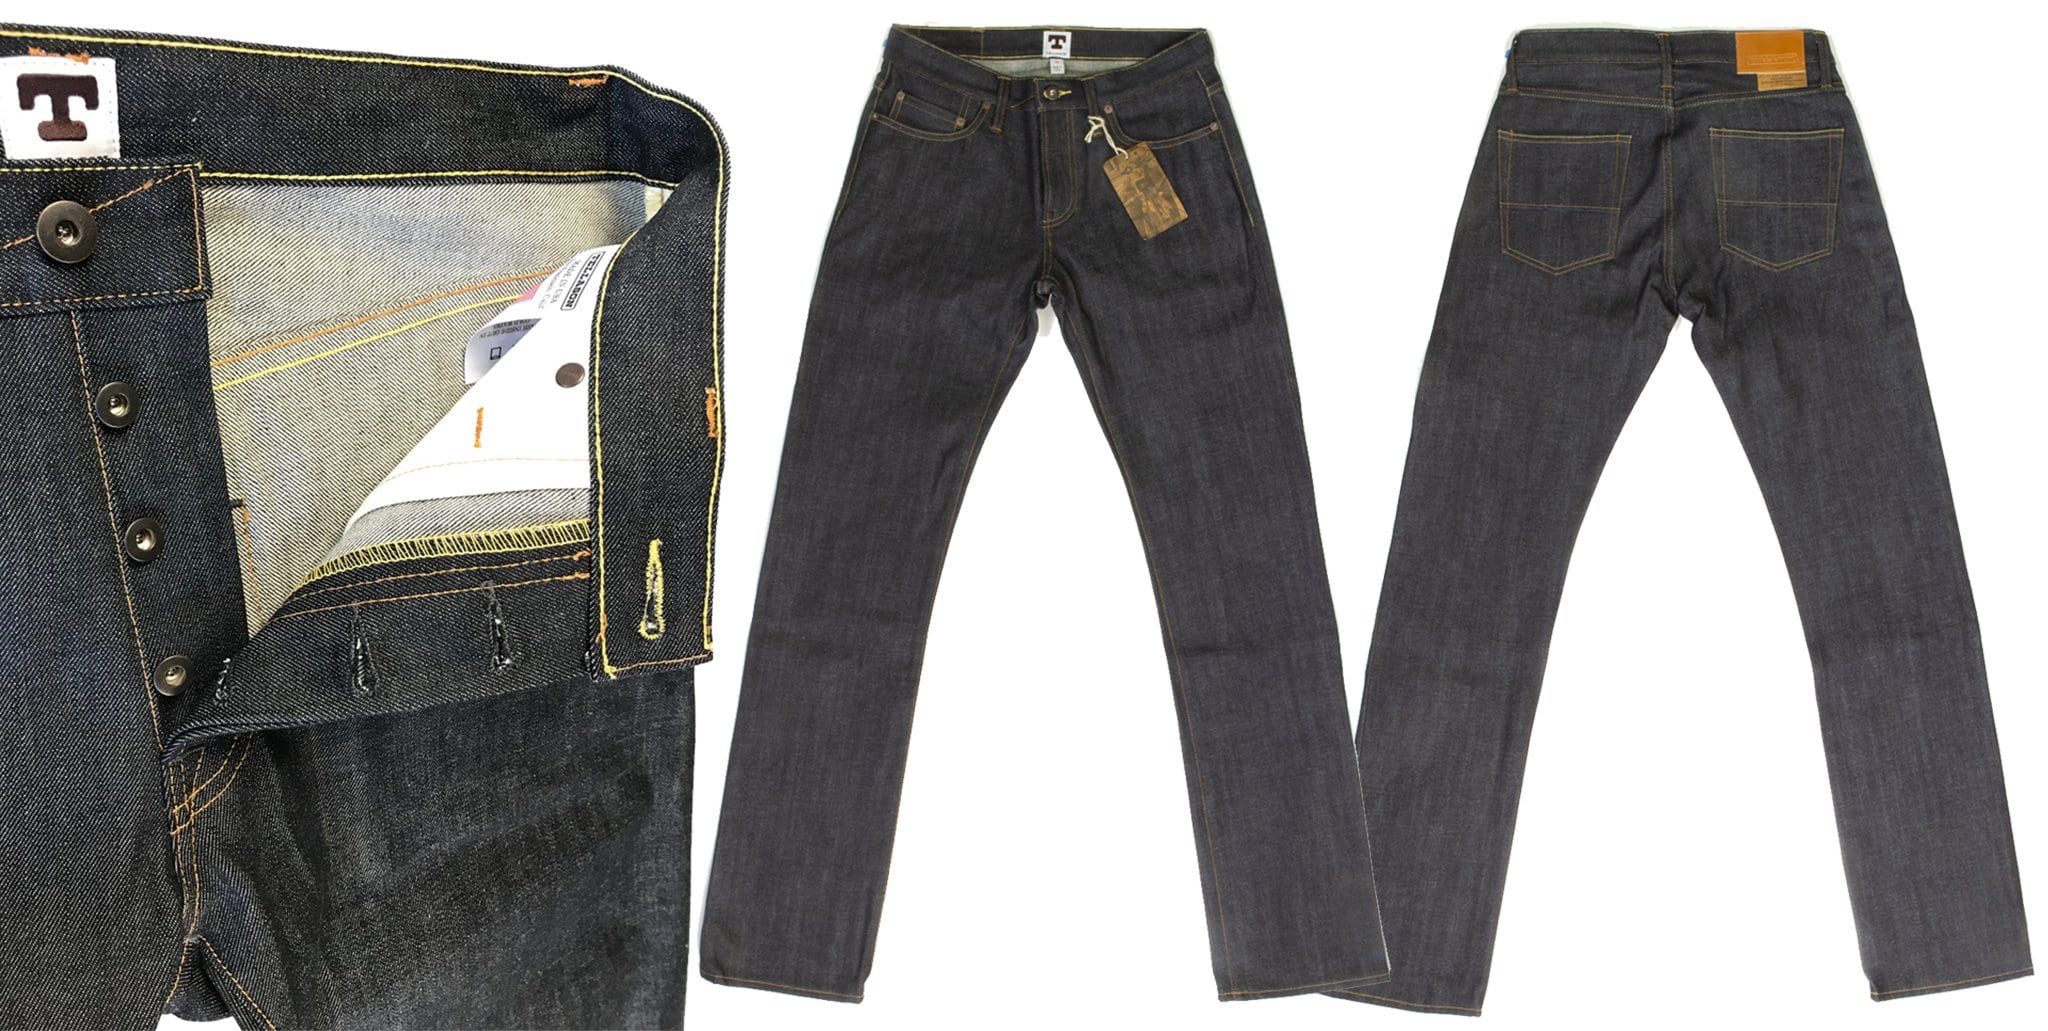 John Graham Mellor at $230: A Tellason specialty featuring proprietary Kaihara Japanese red line raw selvage denim